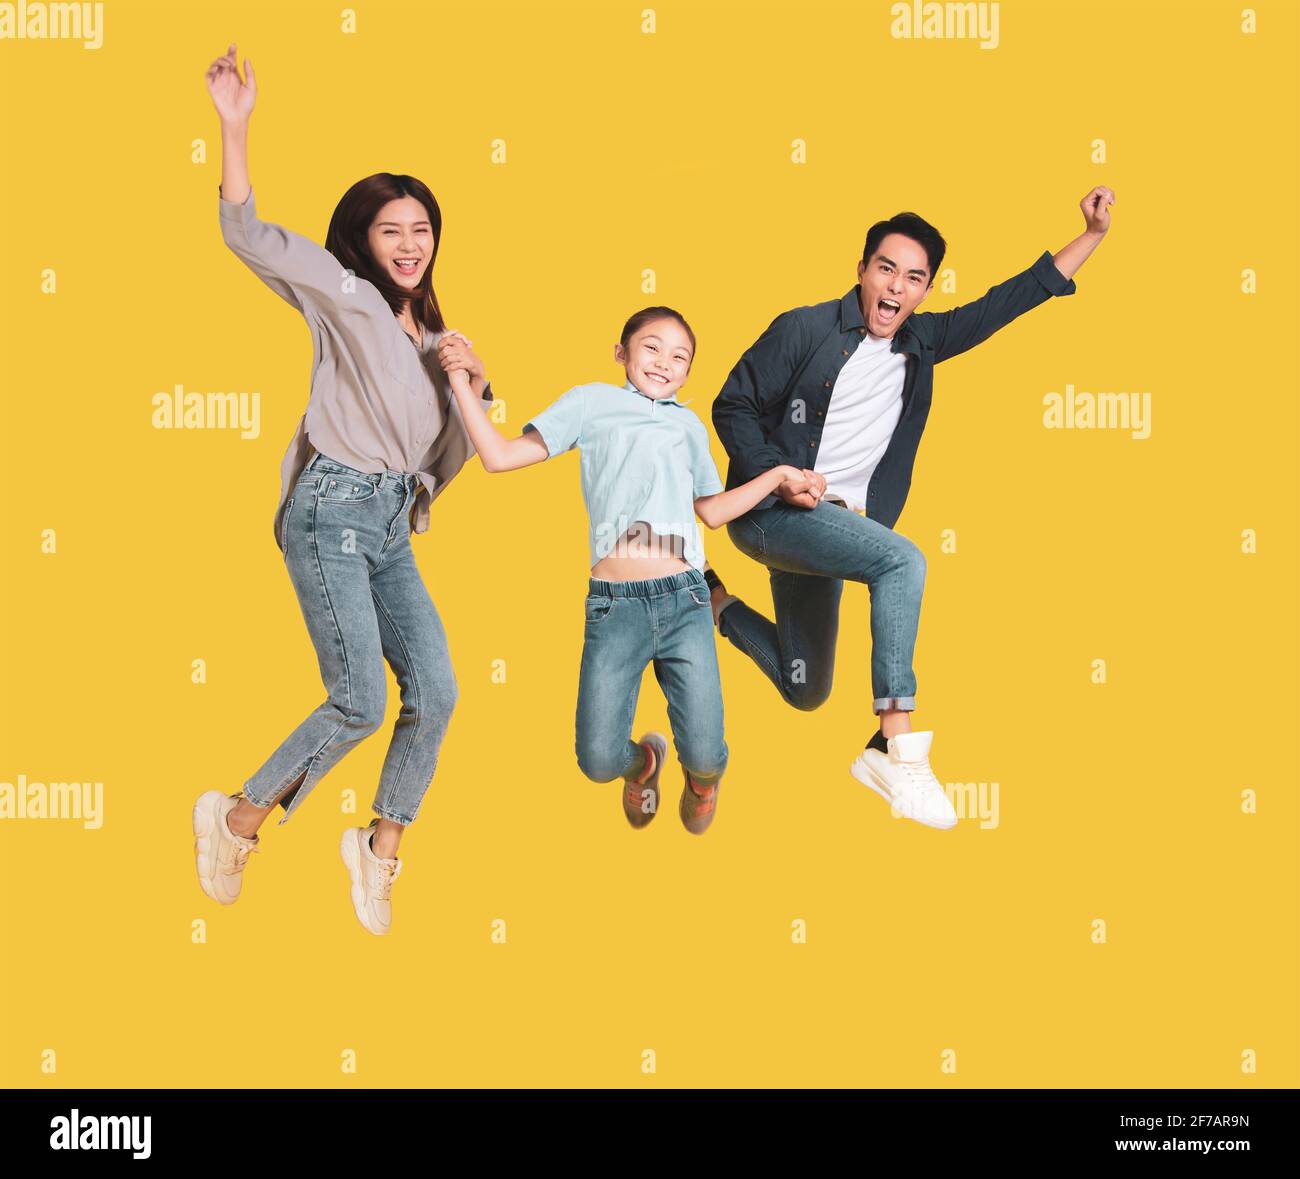 Happy young family with one child jumping together Stock Photo